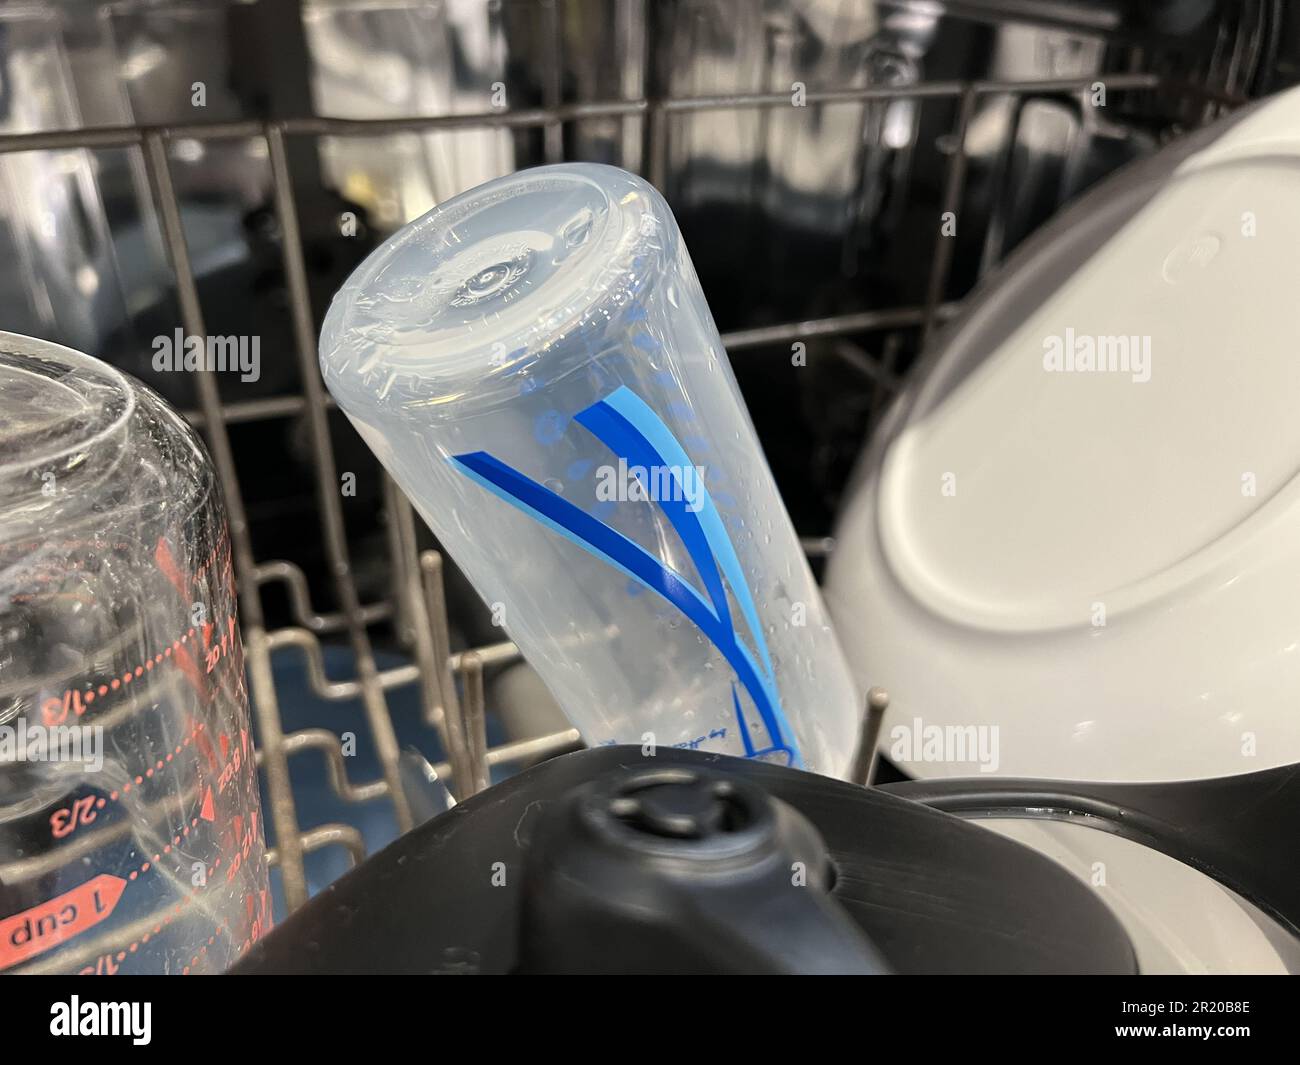 https://c8.alamy.com/comp/2R20B8E/usa-21st-nov-2022-high-angle-shot-of-an-upside-down-dr-browns-natural-flow-baby-bottle-a-glass-measuring-cup-a-plate-and-a-blender-lid-resting-on-a-dishwashing-machine-rack-lafayette-california-november-21-2022-photo-courtesy-sftm-photo-by-gadosipa-usa-credit-sipa-usaalamy-live-news-2R20B8E.jpg